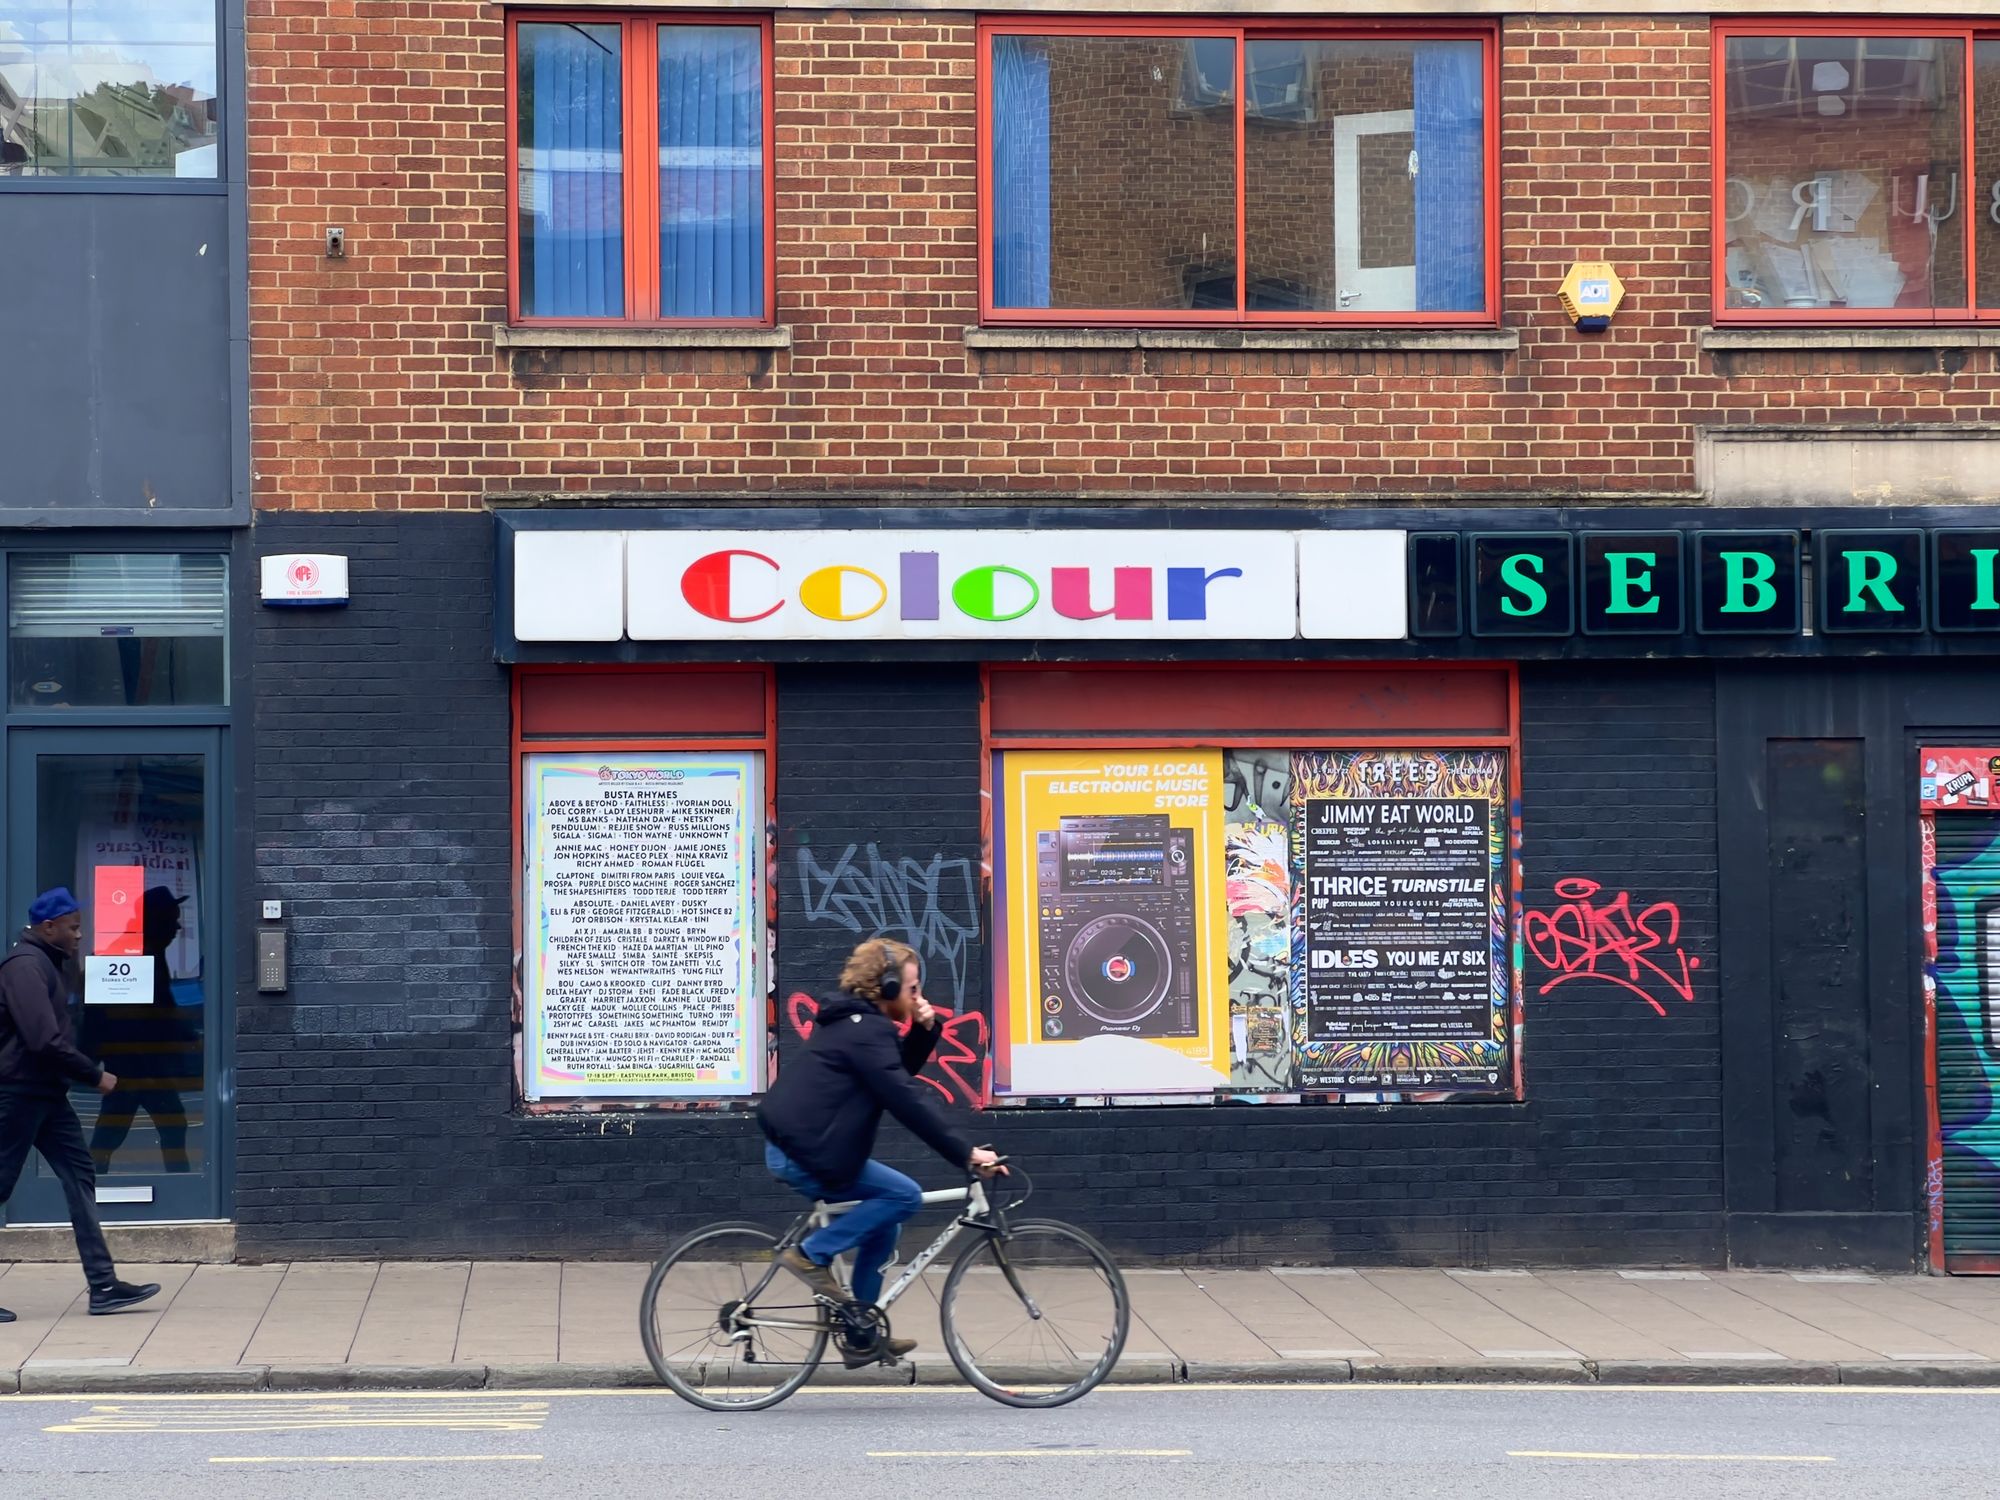 A man cycling wearing headphones in front of a colour printers' shop with bills posted on the side.